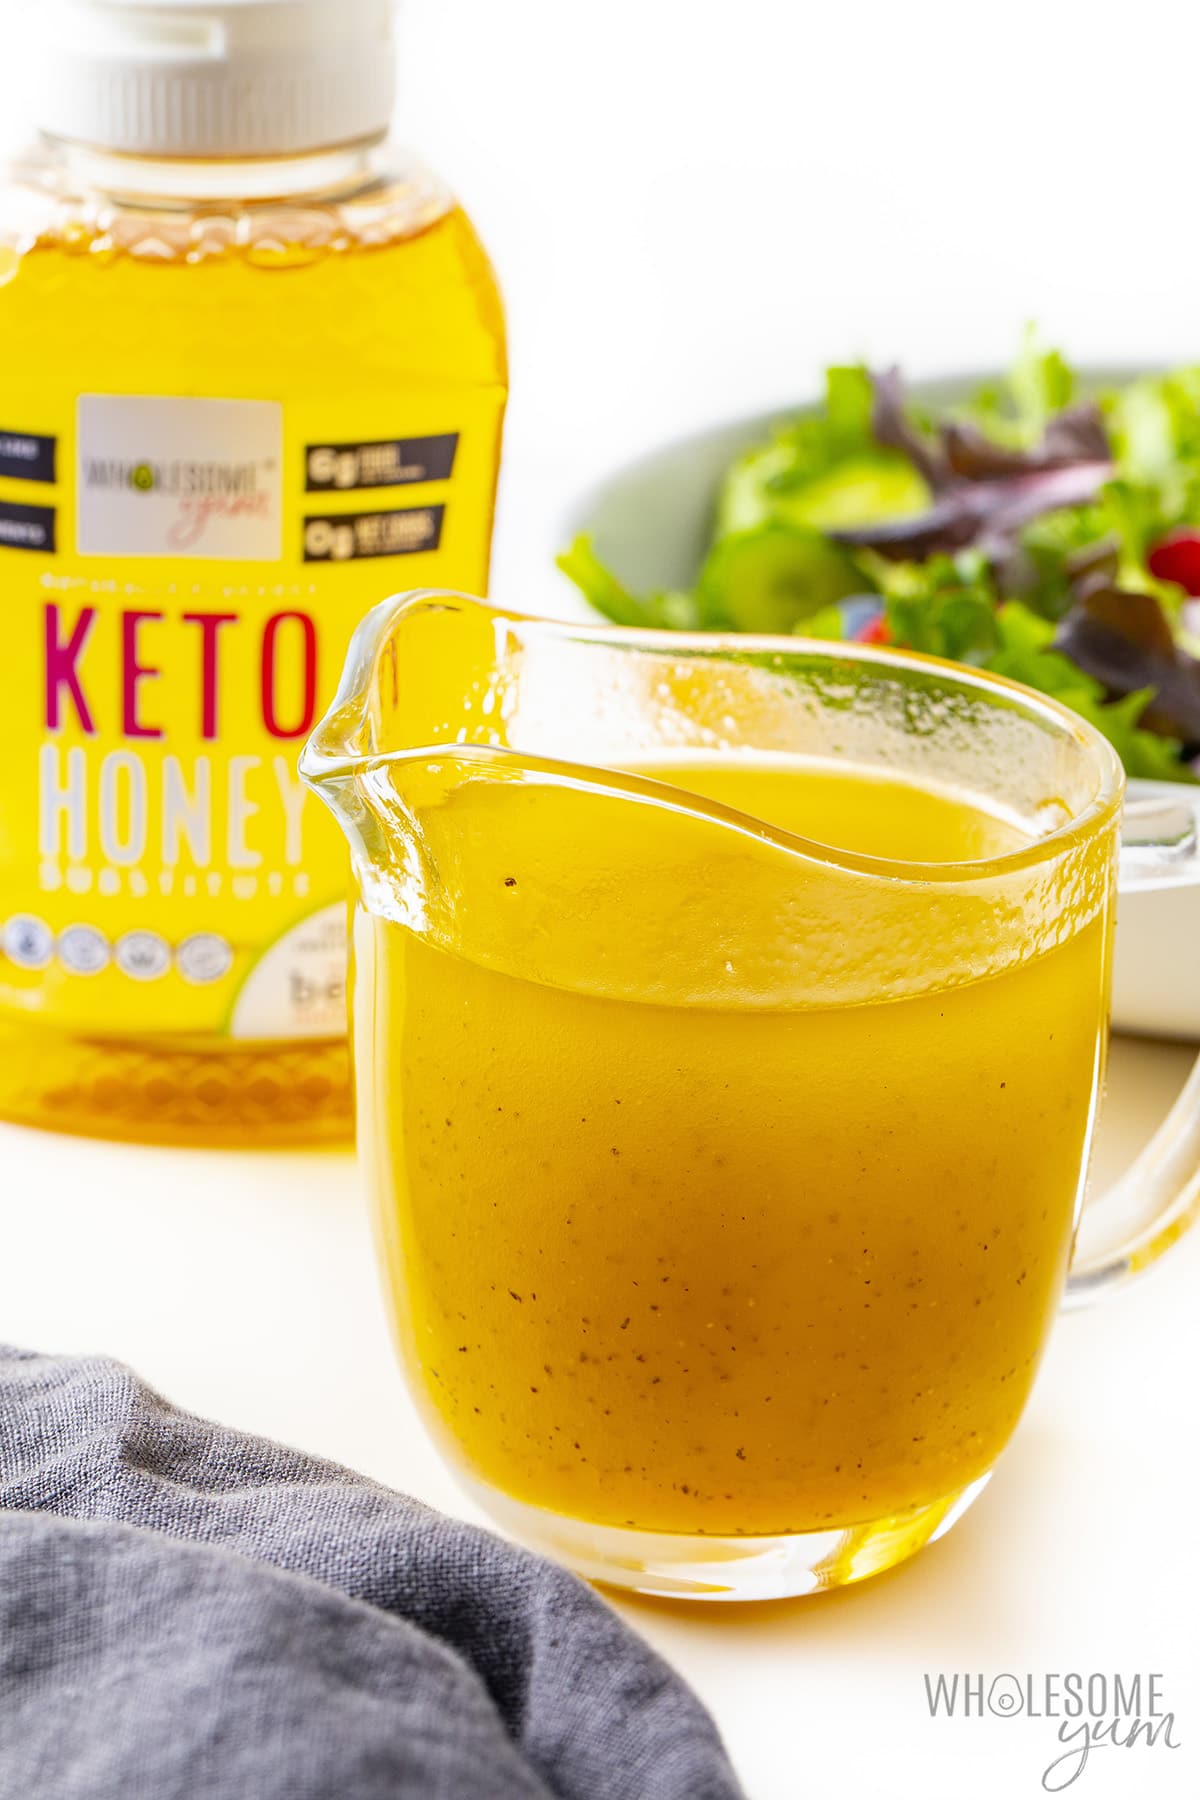 Keto salad dressing in small glass pitcher, with salad and keto honey in the background.